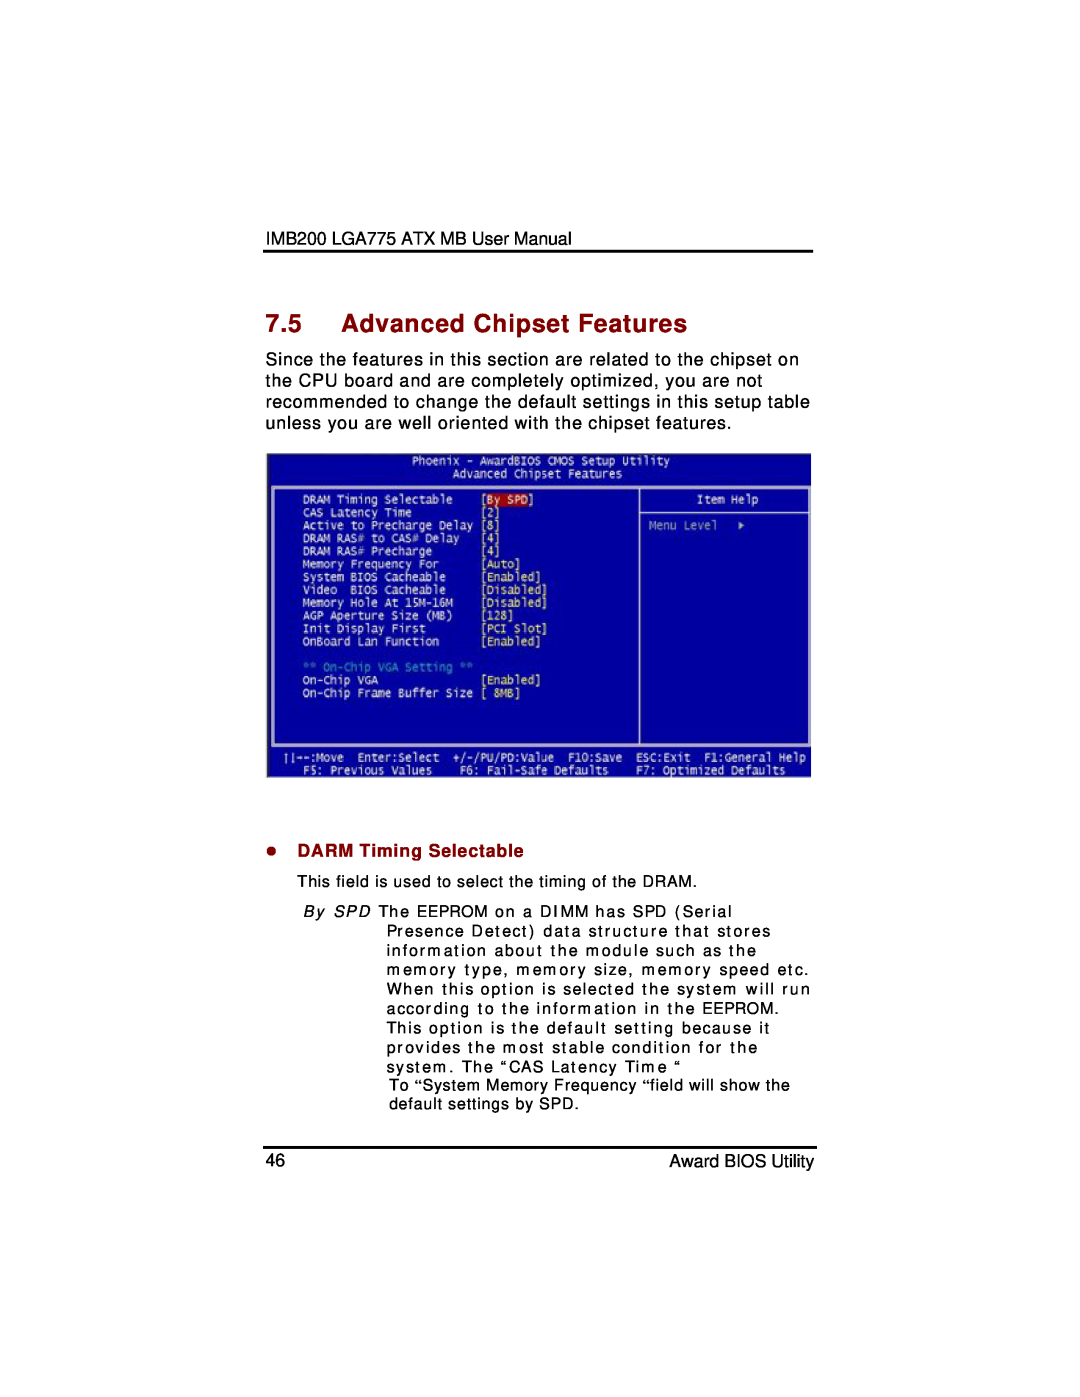 Intel IMB200VGE user manual Advanced Chipset Features, z DARM Timing Selectable 